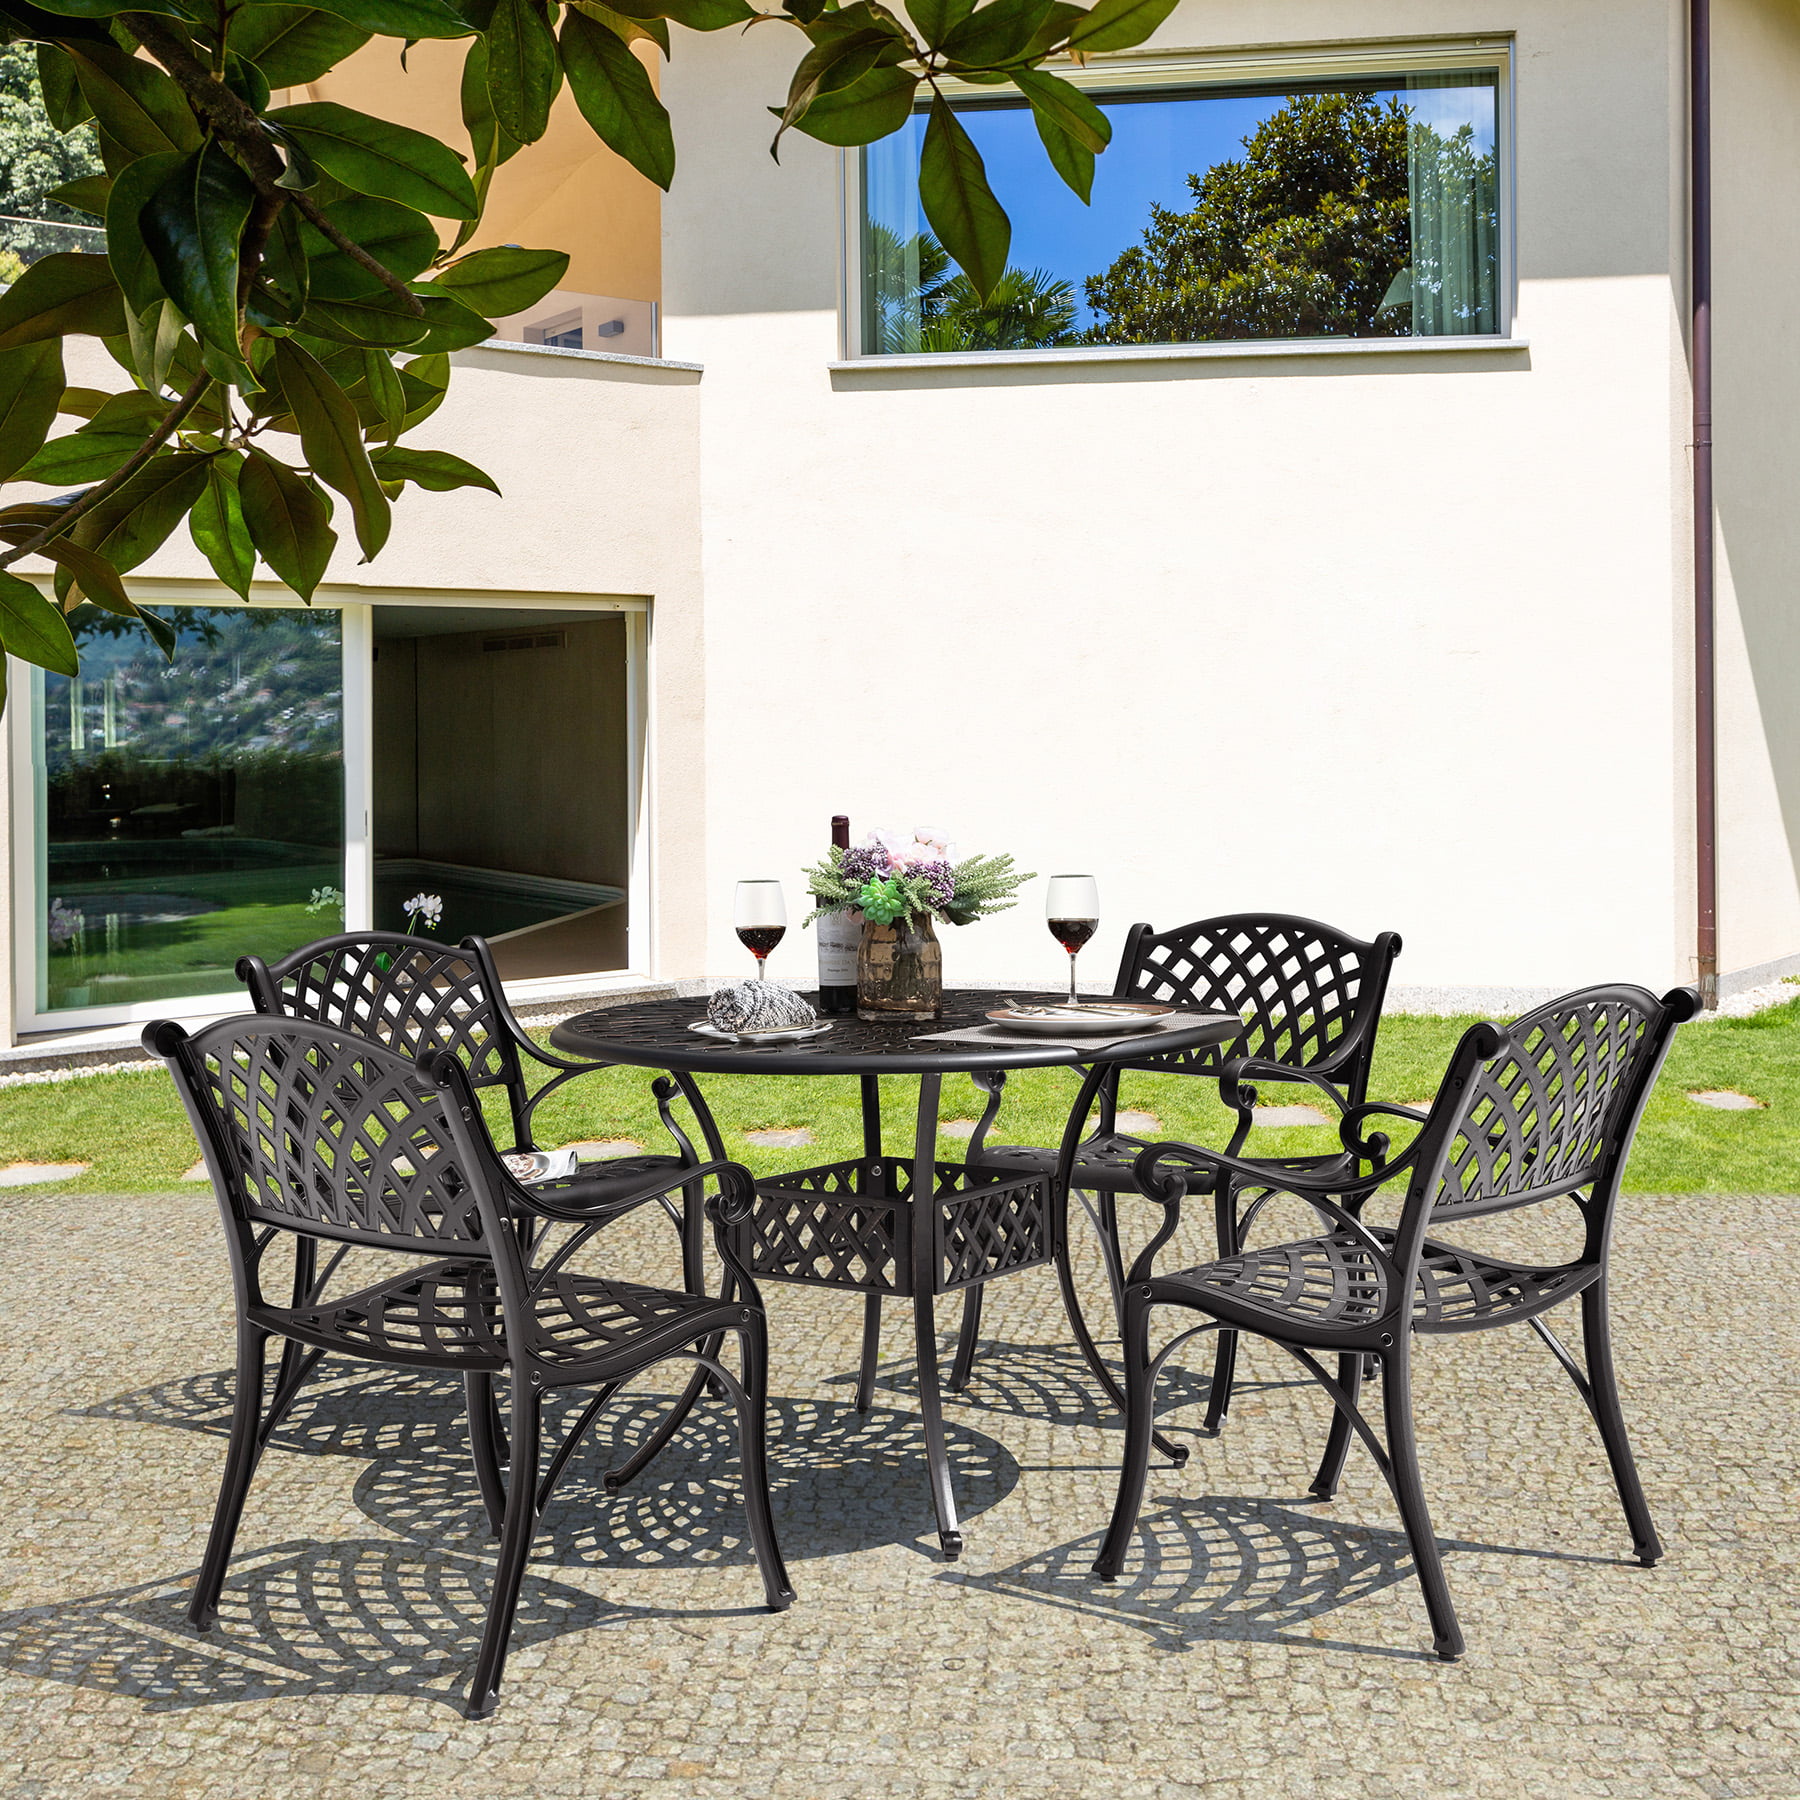 Durable Outdoor Dining Sets For Backyard Parties